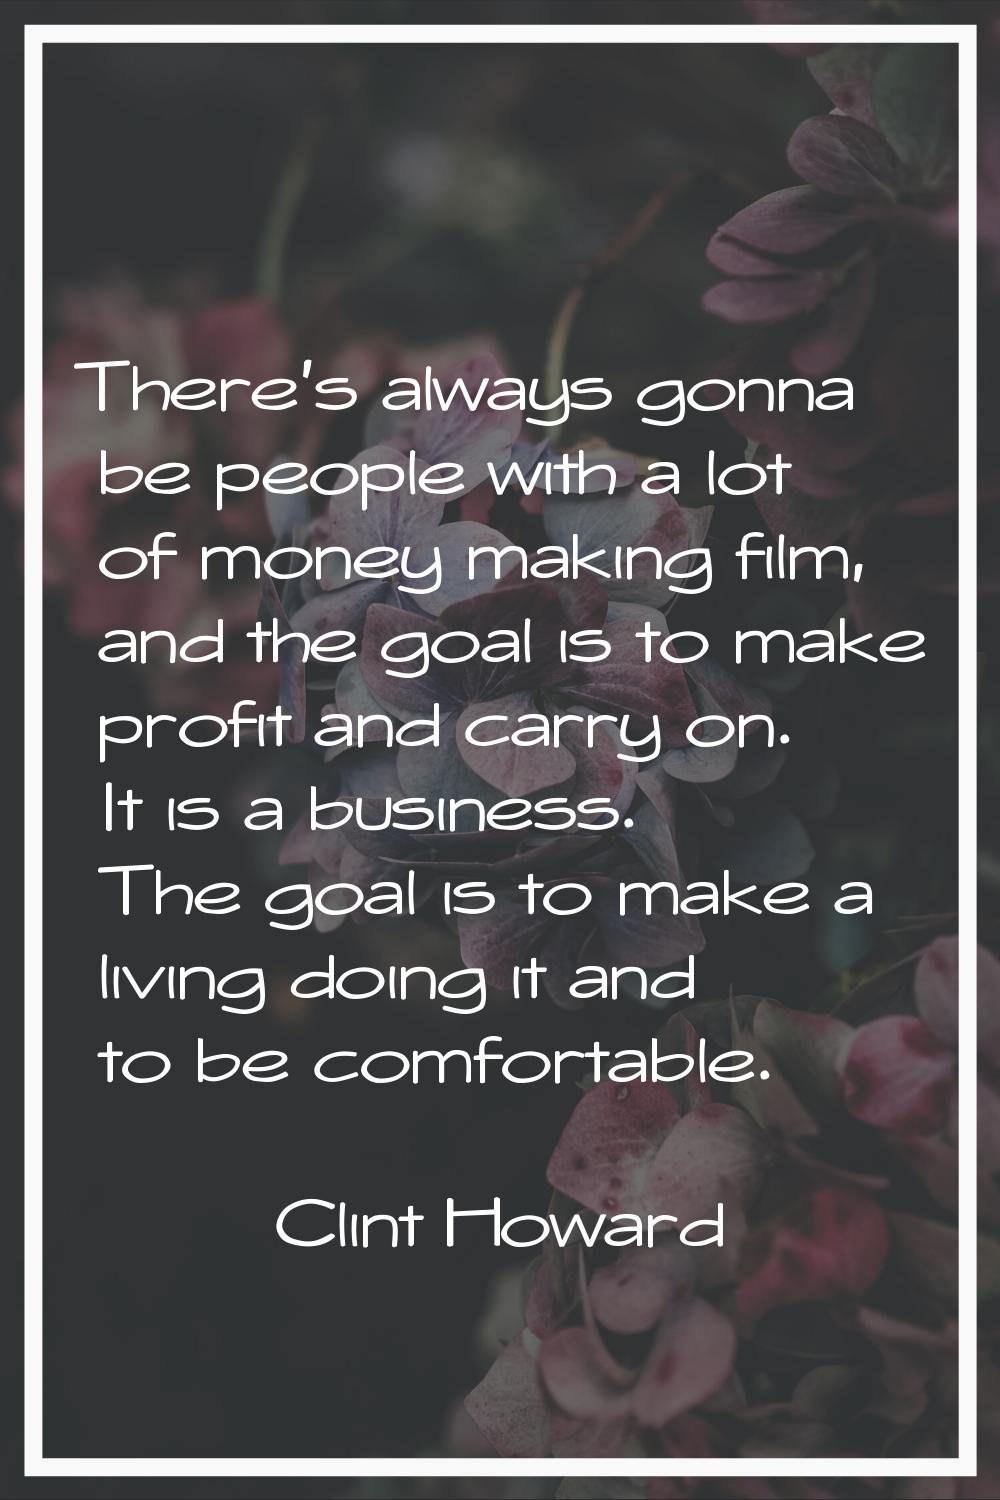 There's always gonna be people with a lot of money making film, and the goal is to make profit and 